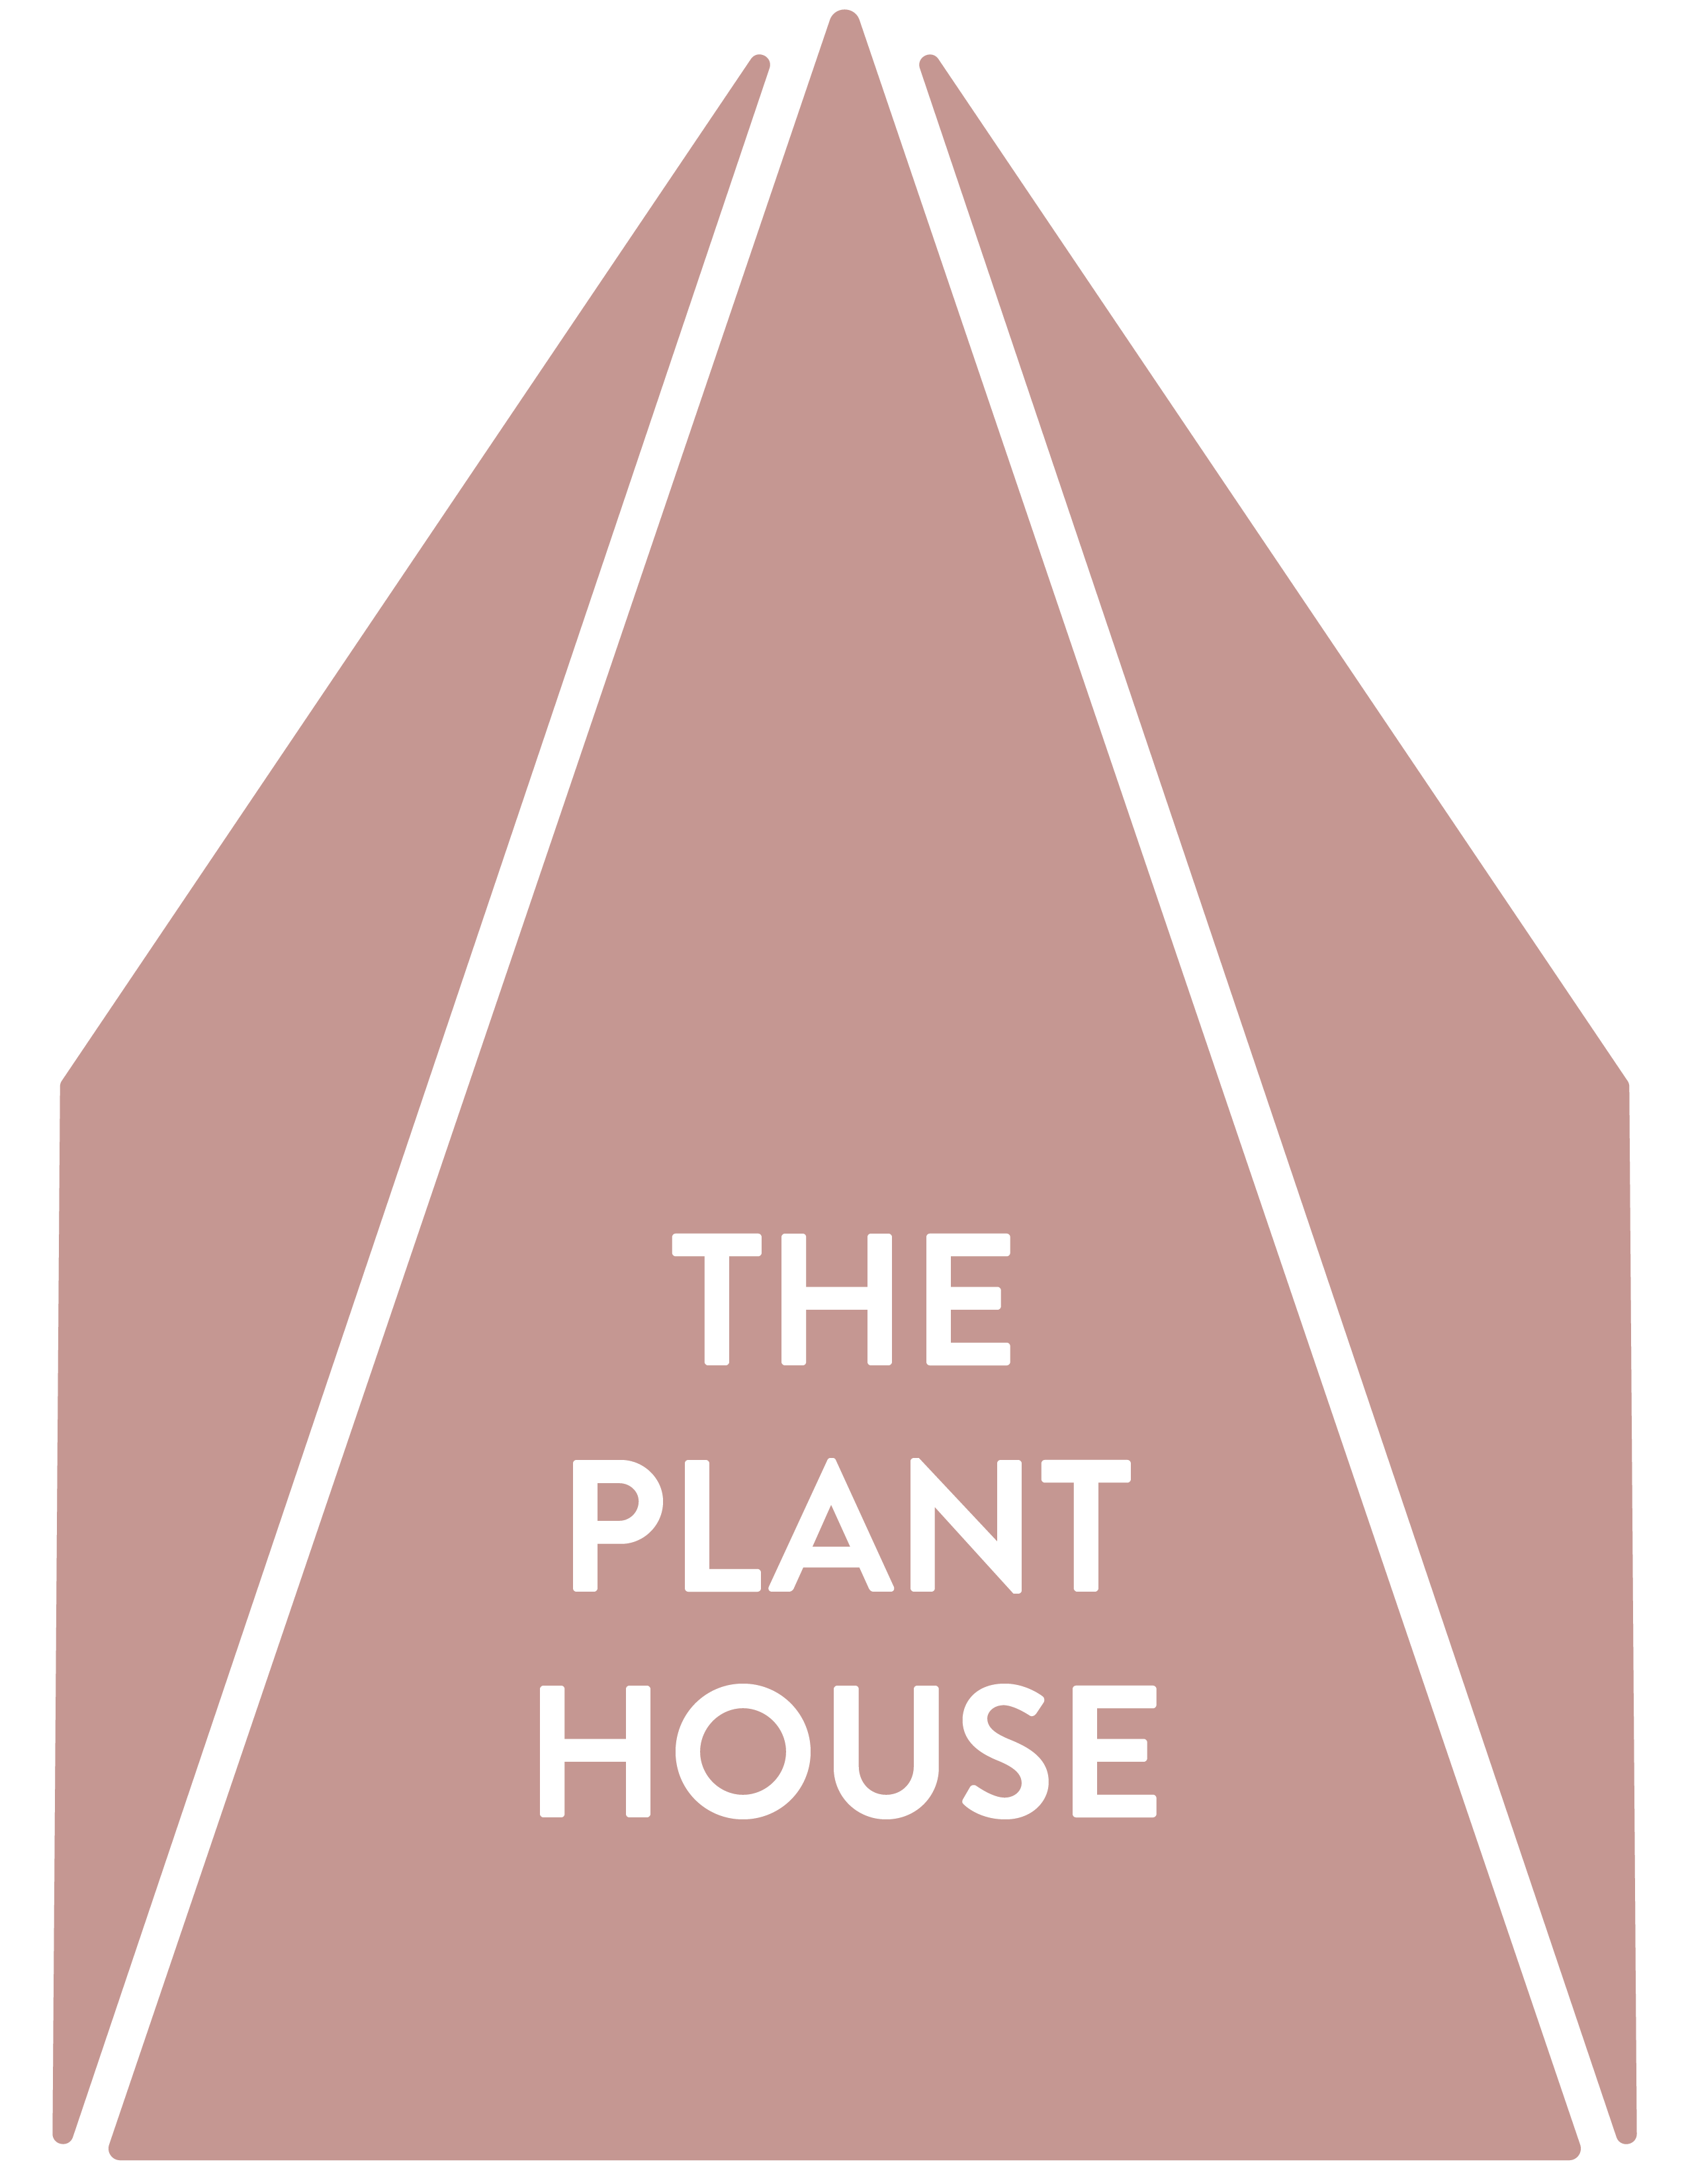 THE PLANT HOUSE